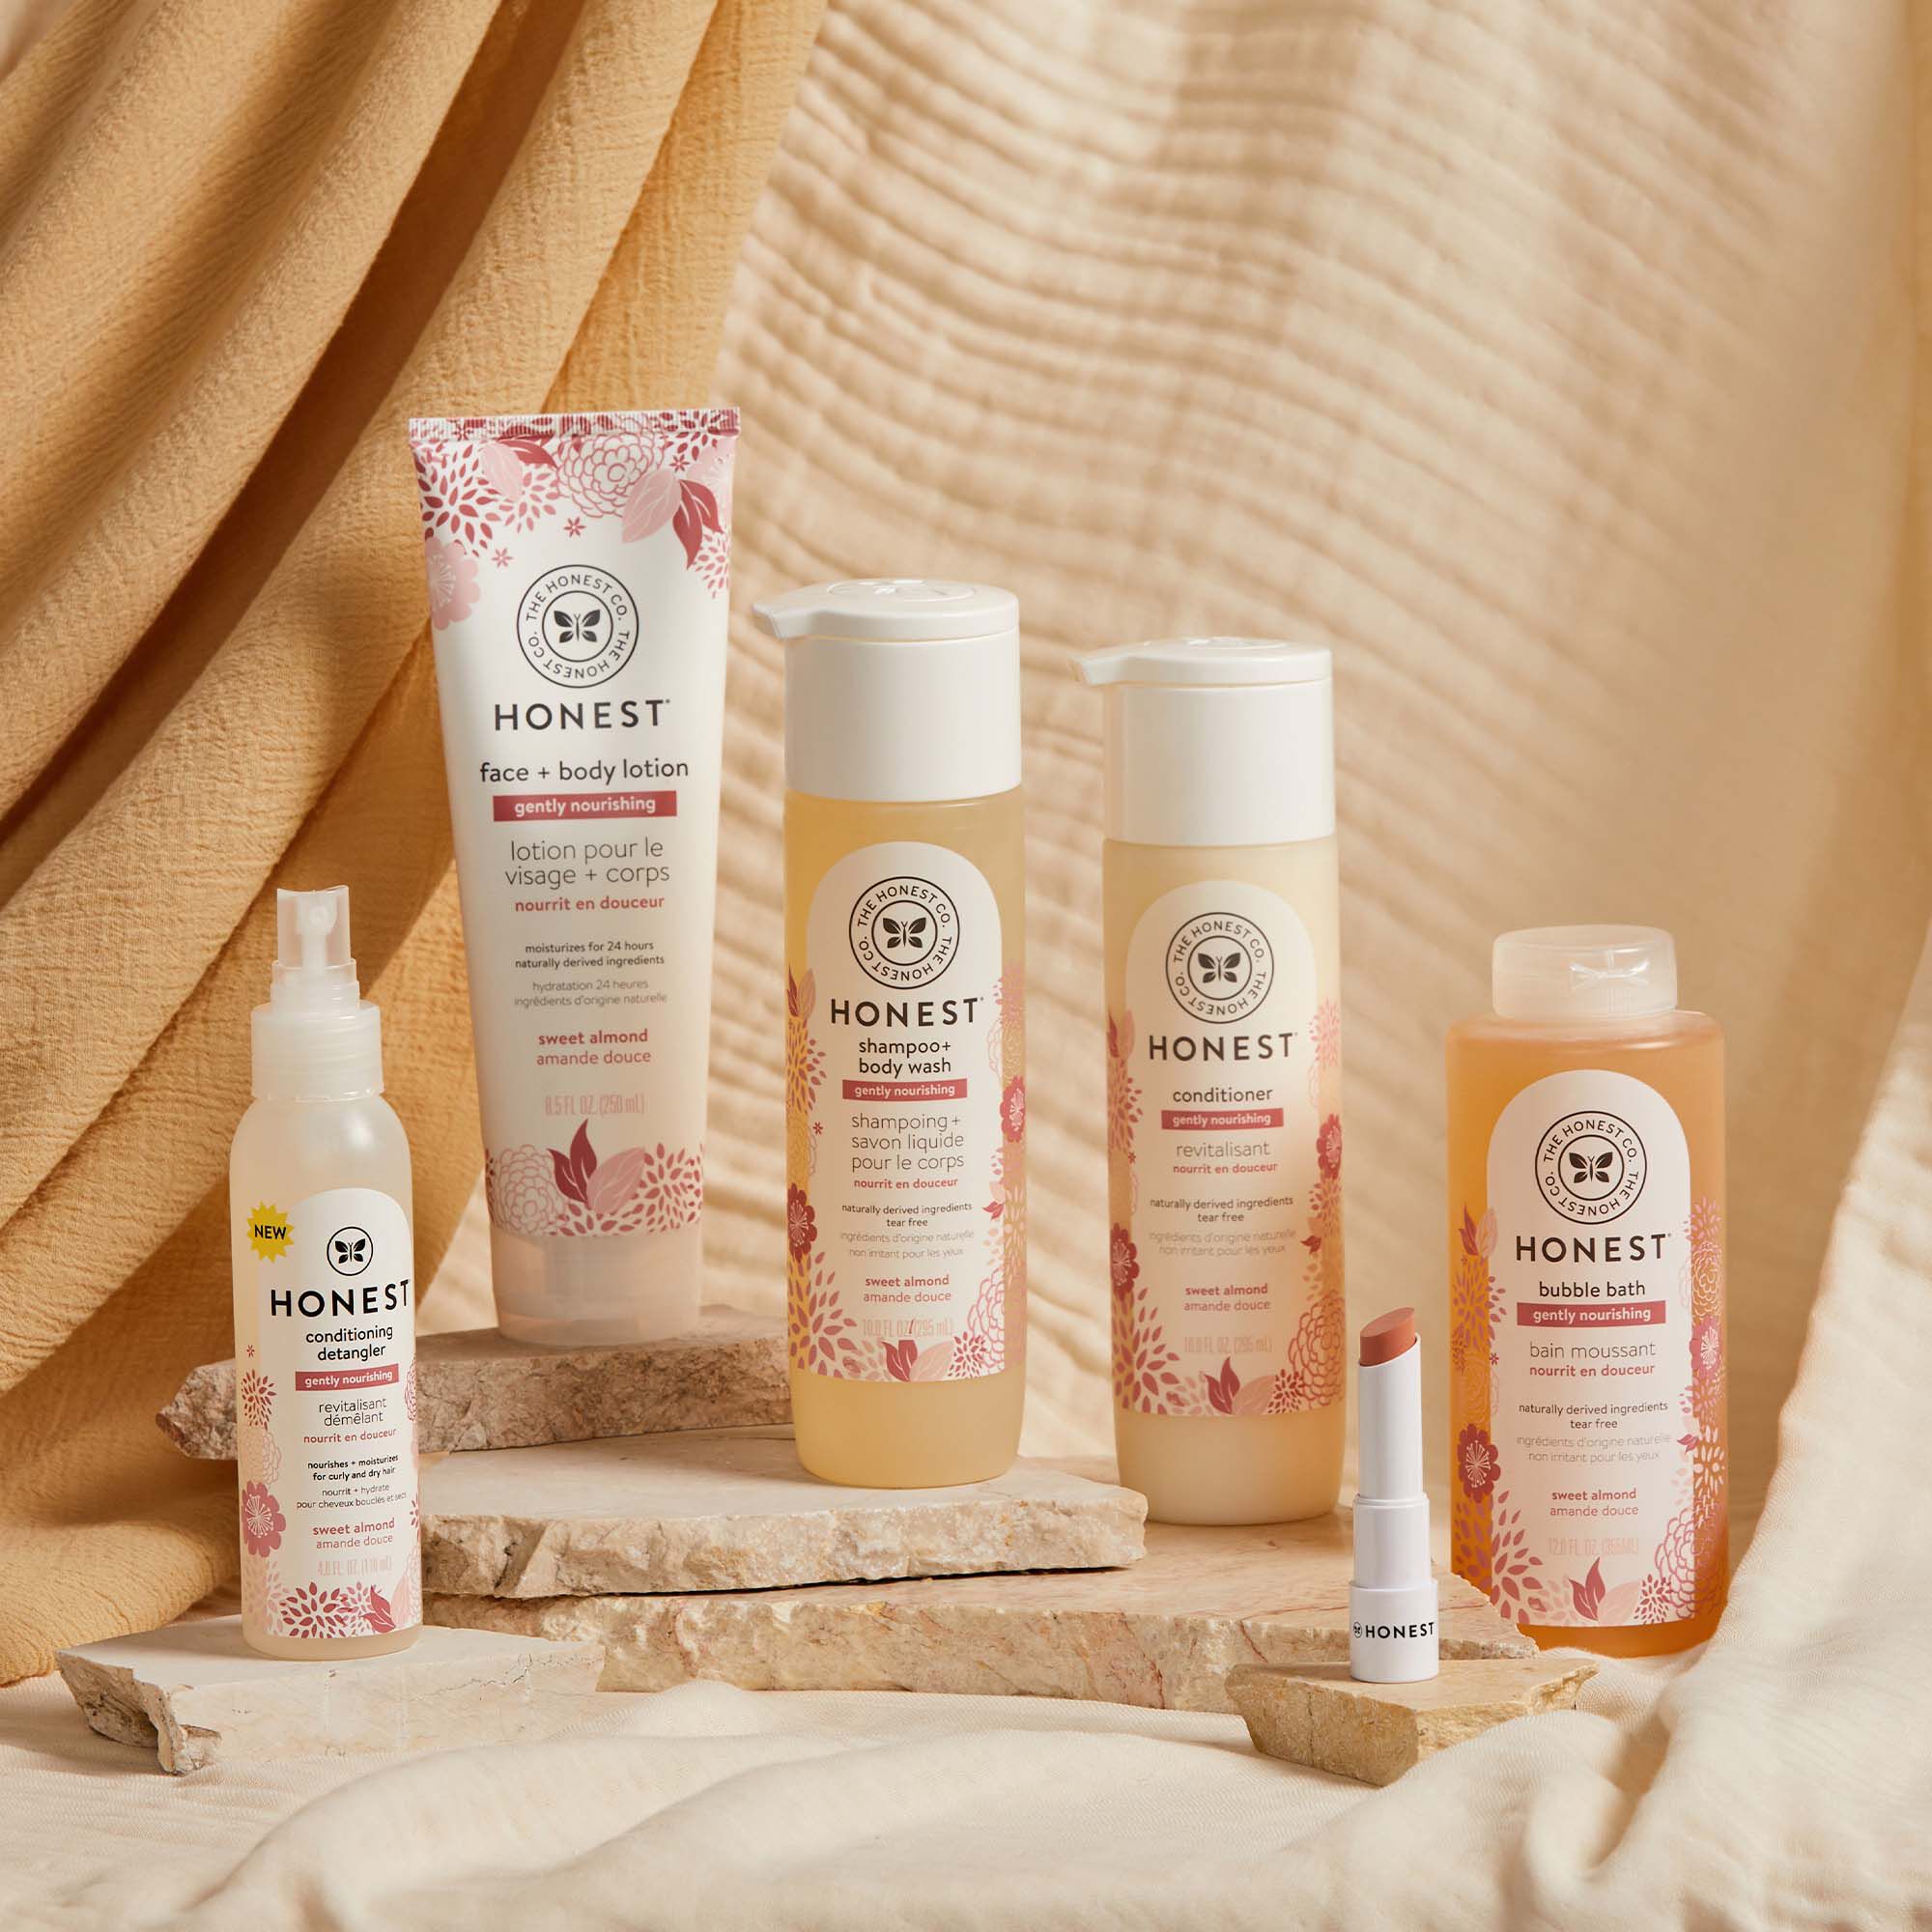 The gift set includes skin and body care items that will help improve her beauty even more.